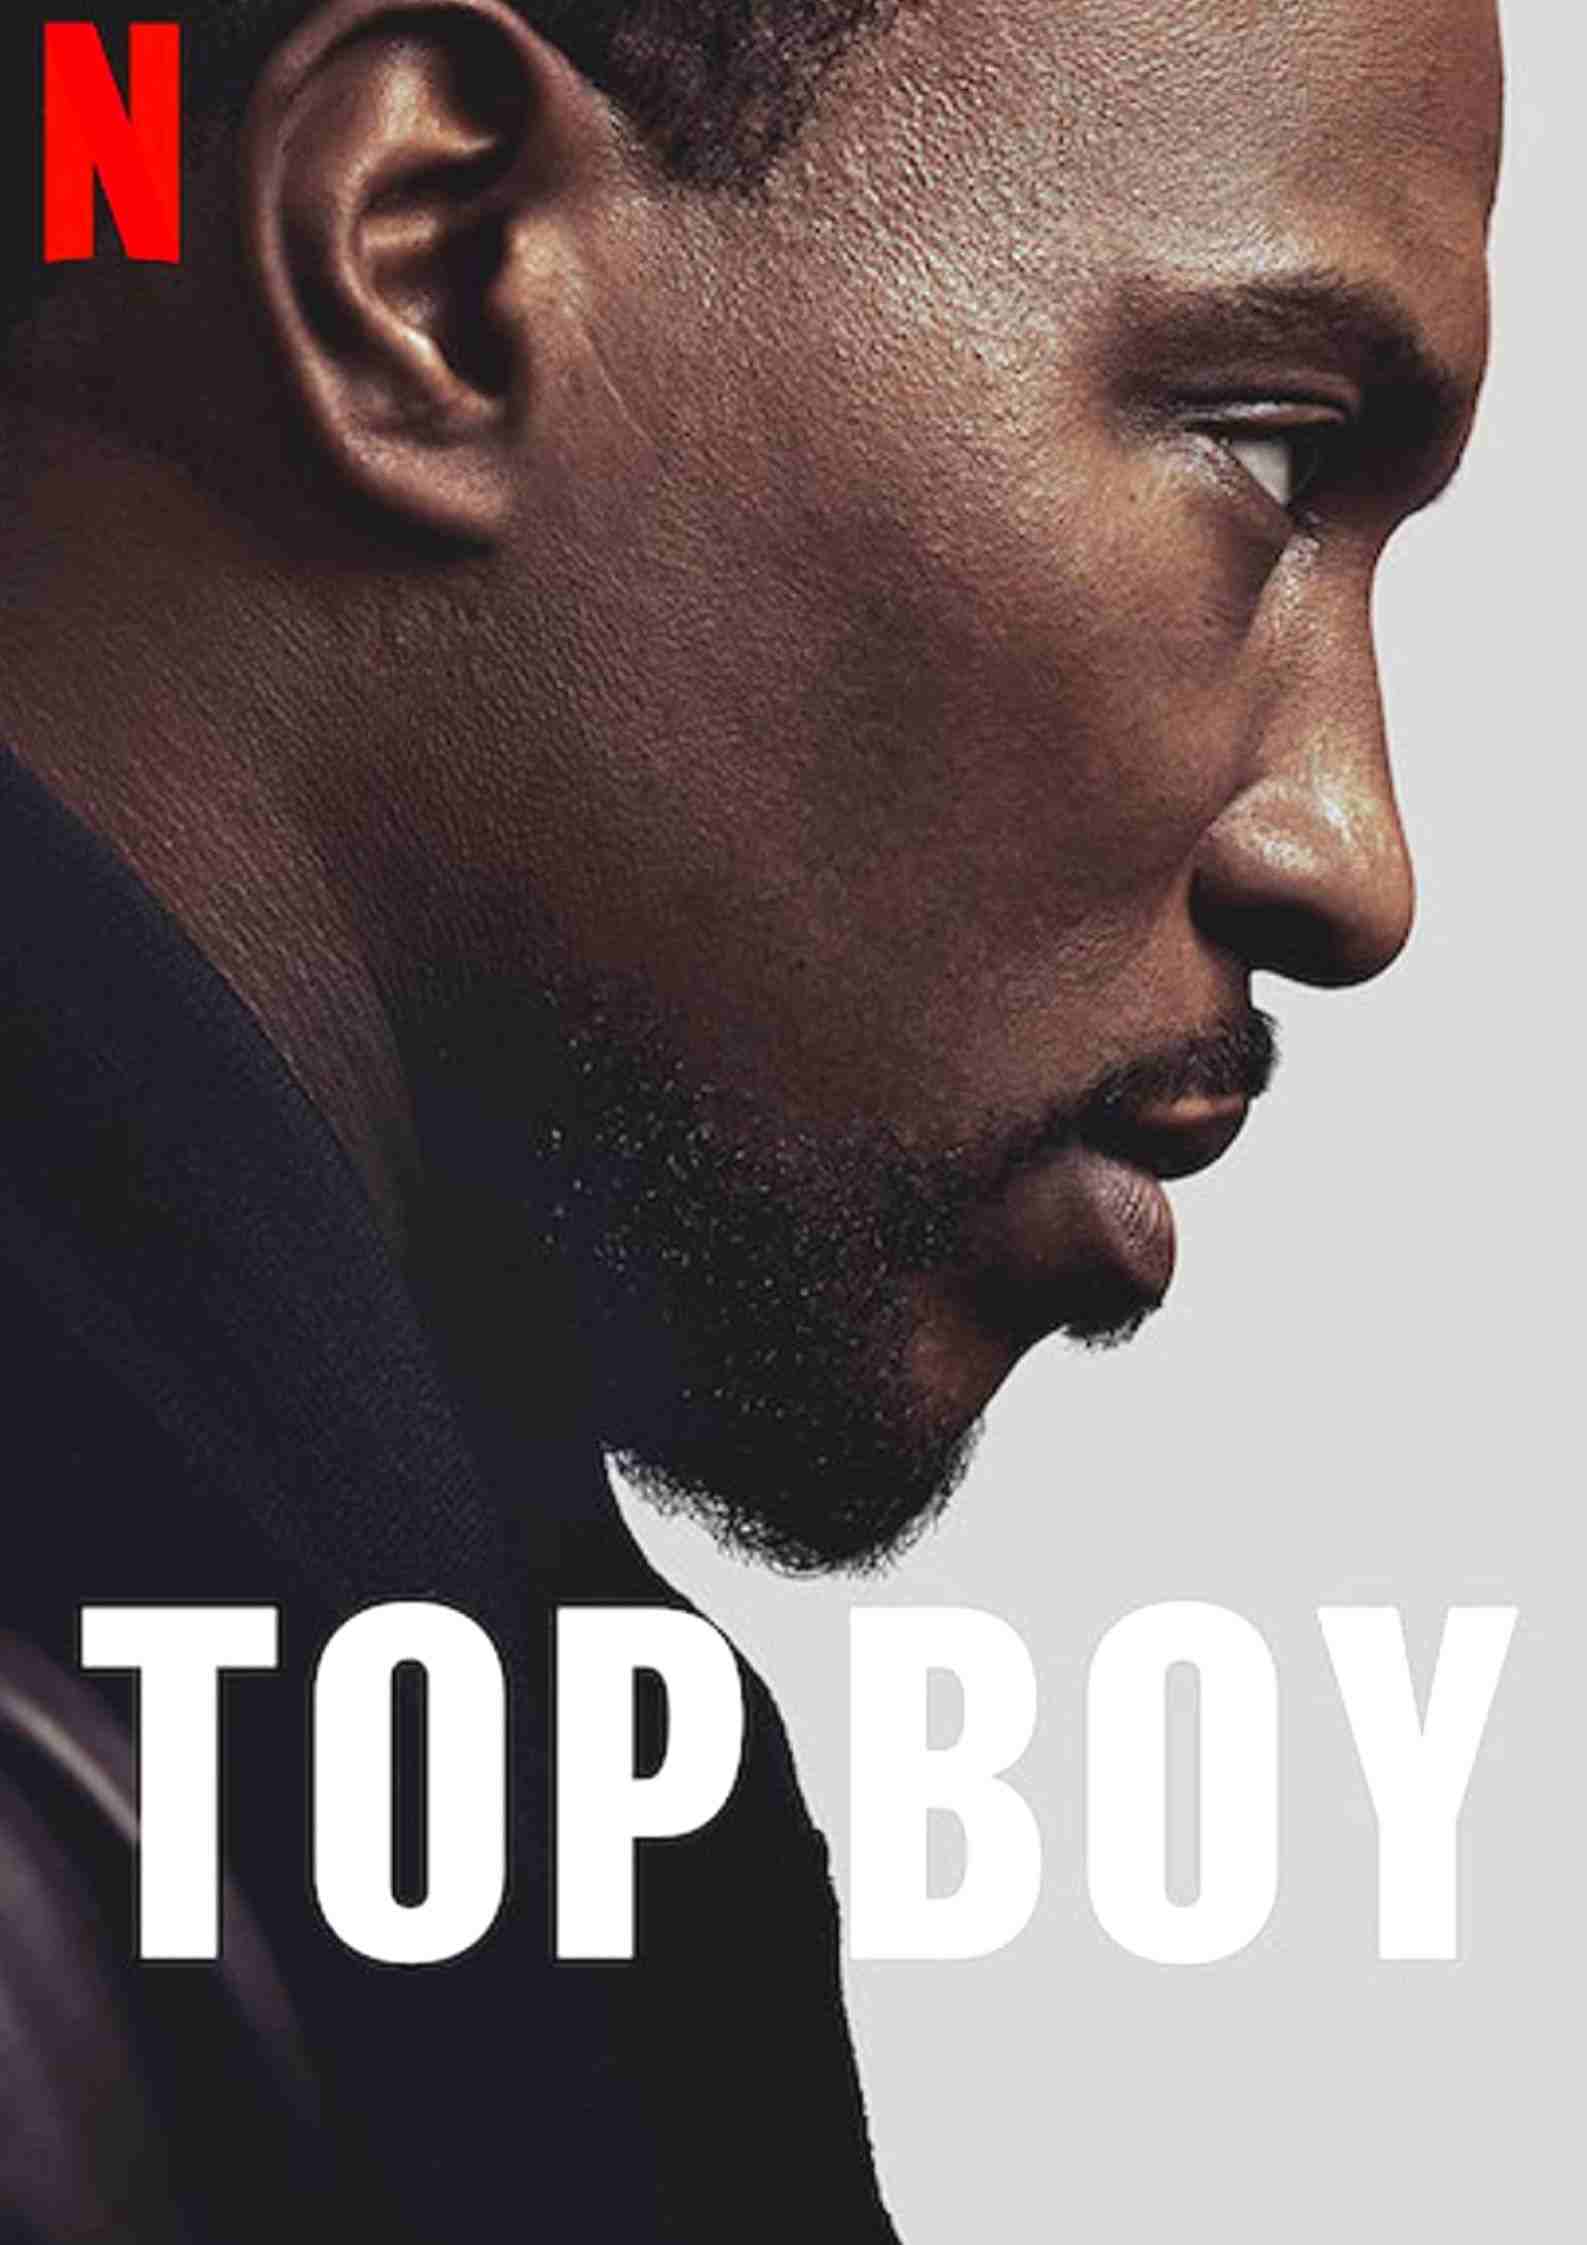 Top Boy Parents guide and age rating | 2022